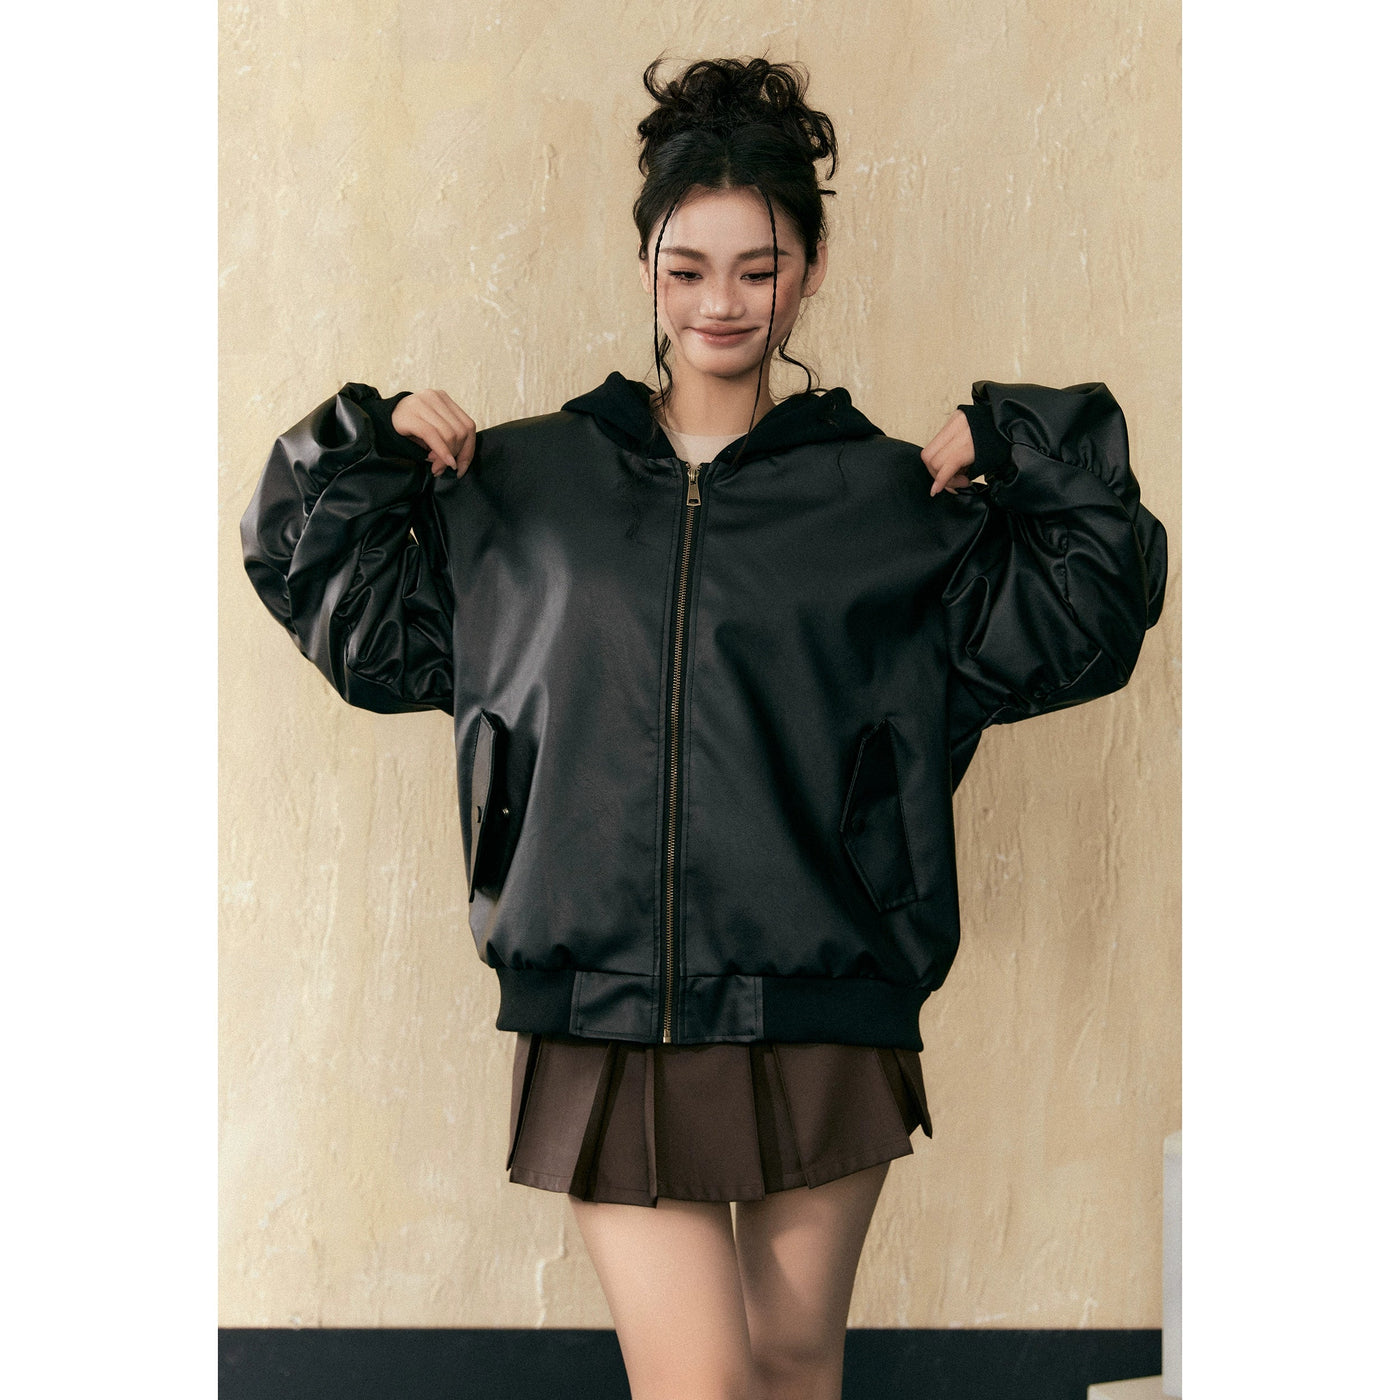 Poofy Army Green Bomber Jacket Korean Style, Women's Fashion, Coats, Jackets  and Outerwear on Carousell